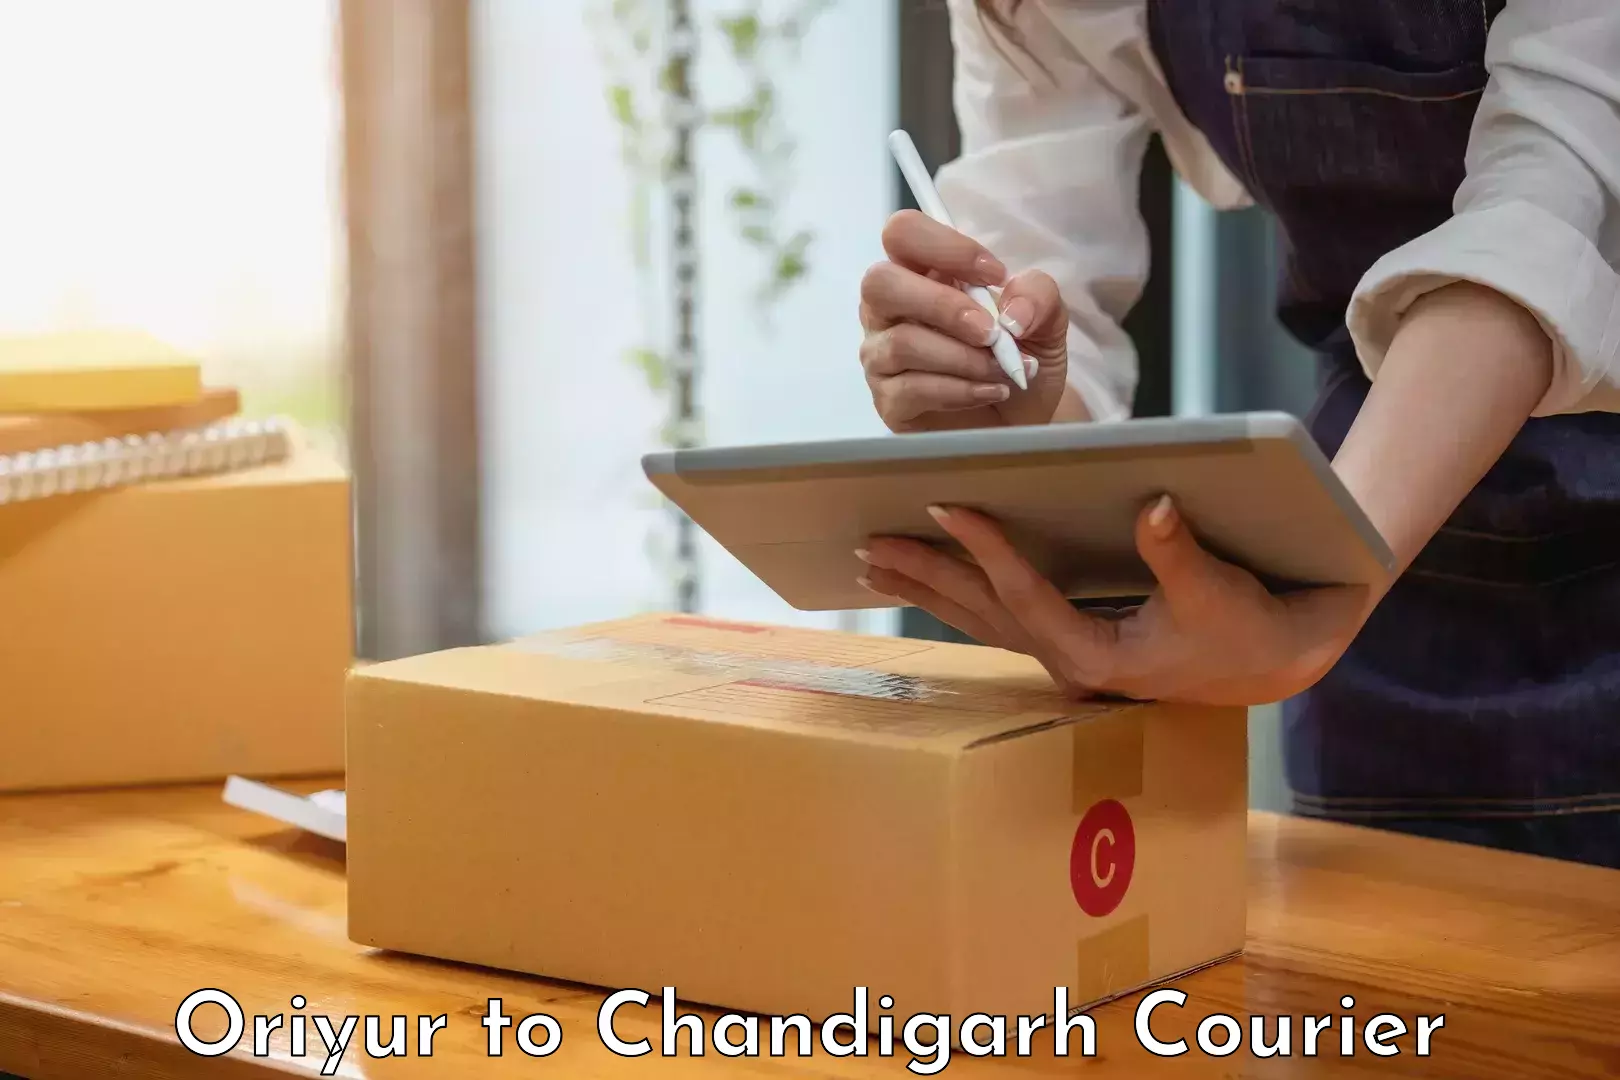 Courier service booking Oriyur to Chandigarh